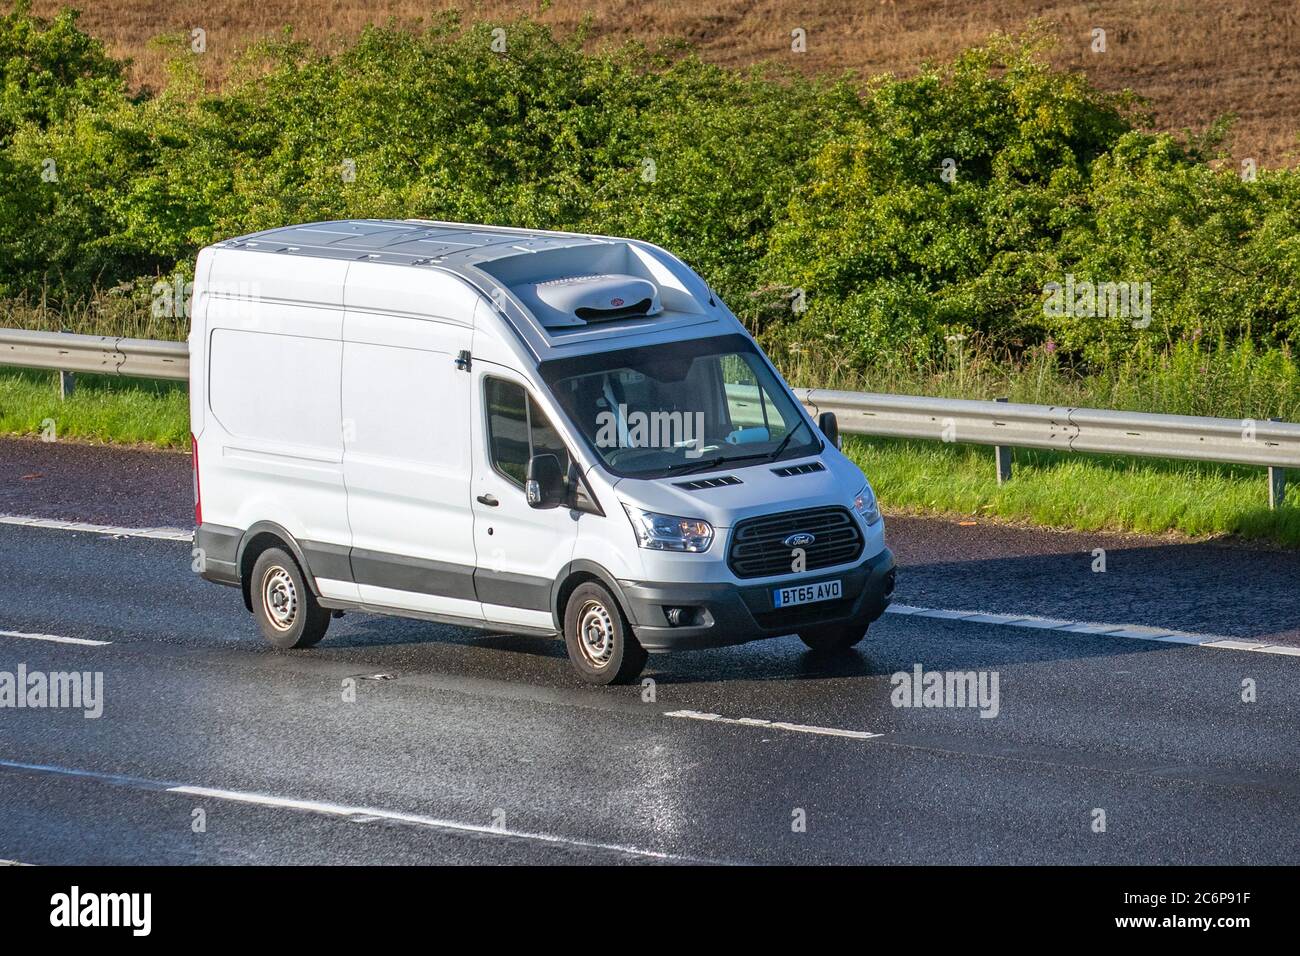 2015 white Ford Transit 350; Haulage delivery trucks, lorry, transportation, truck, panel van cargo carrier, vehicle, European commercial transport industry HGV, M6 at Manchester, UK Stock Photo